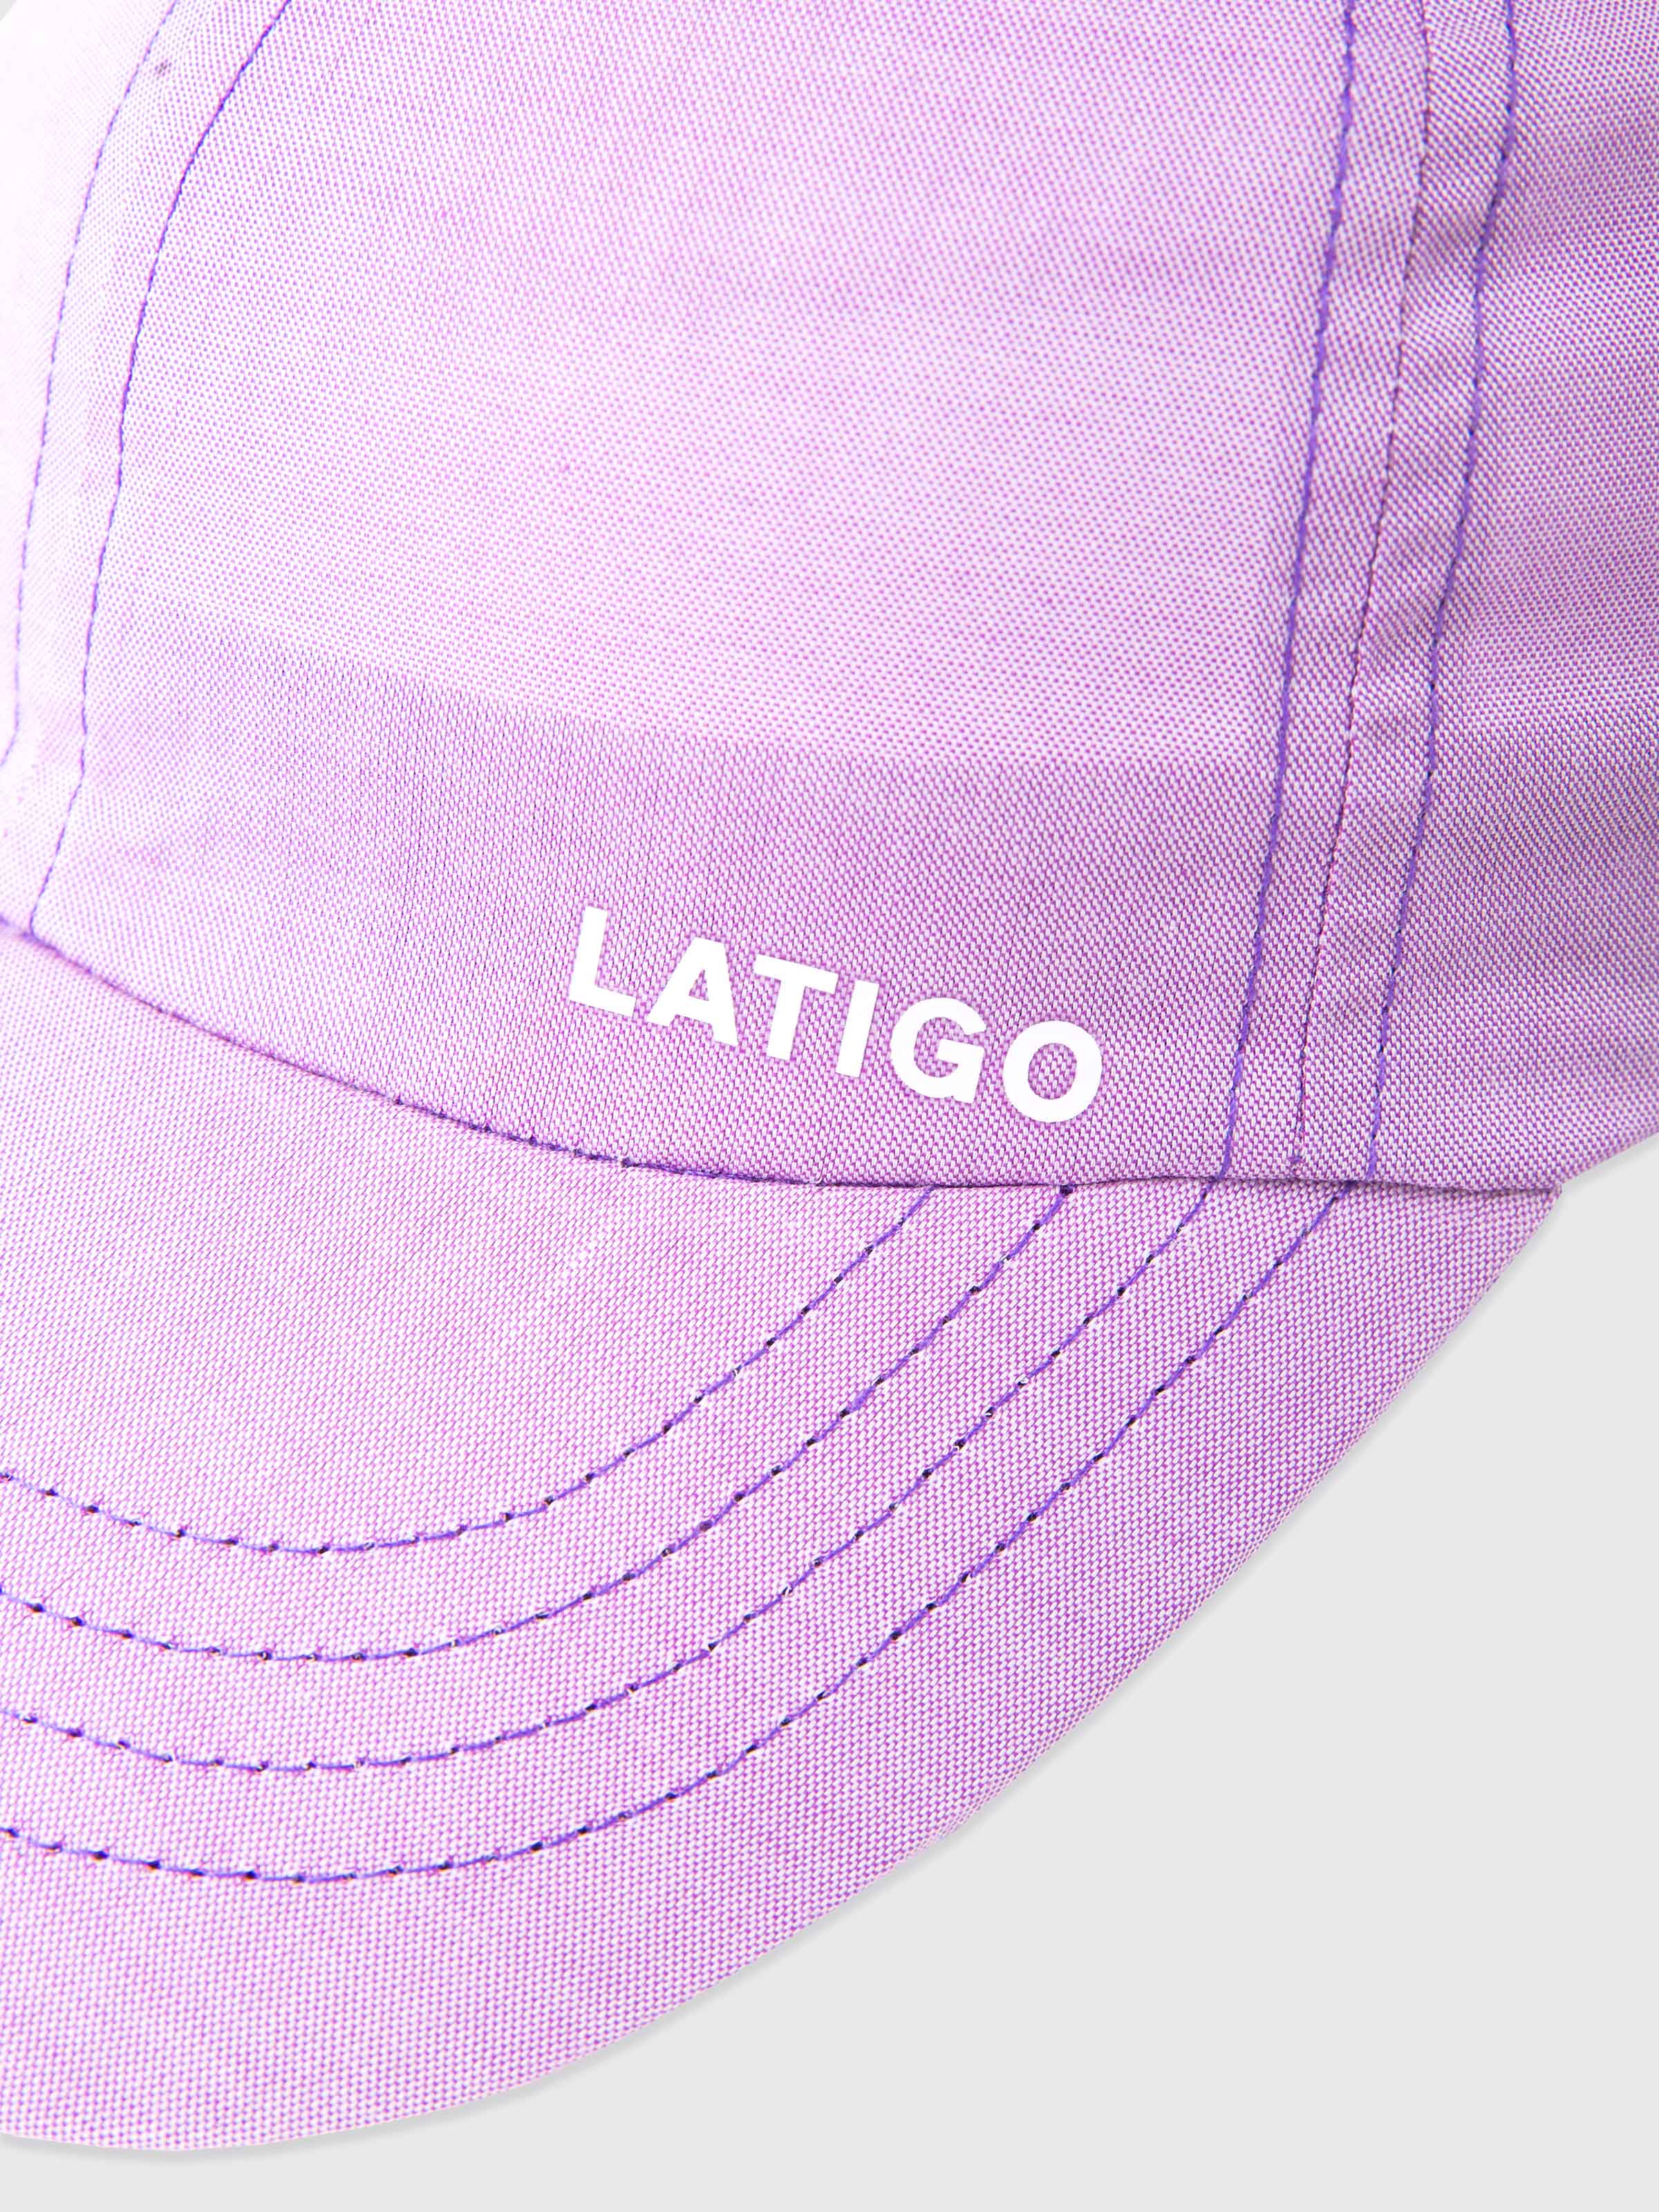 "Oxford Pack" Dad Hat Lilac